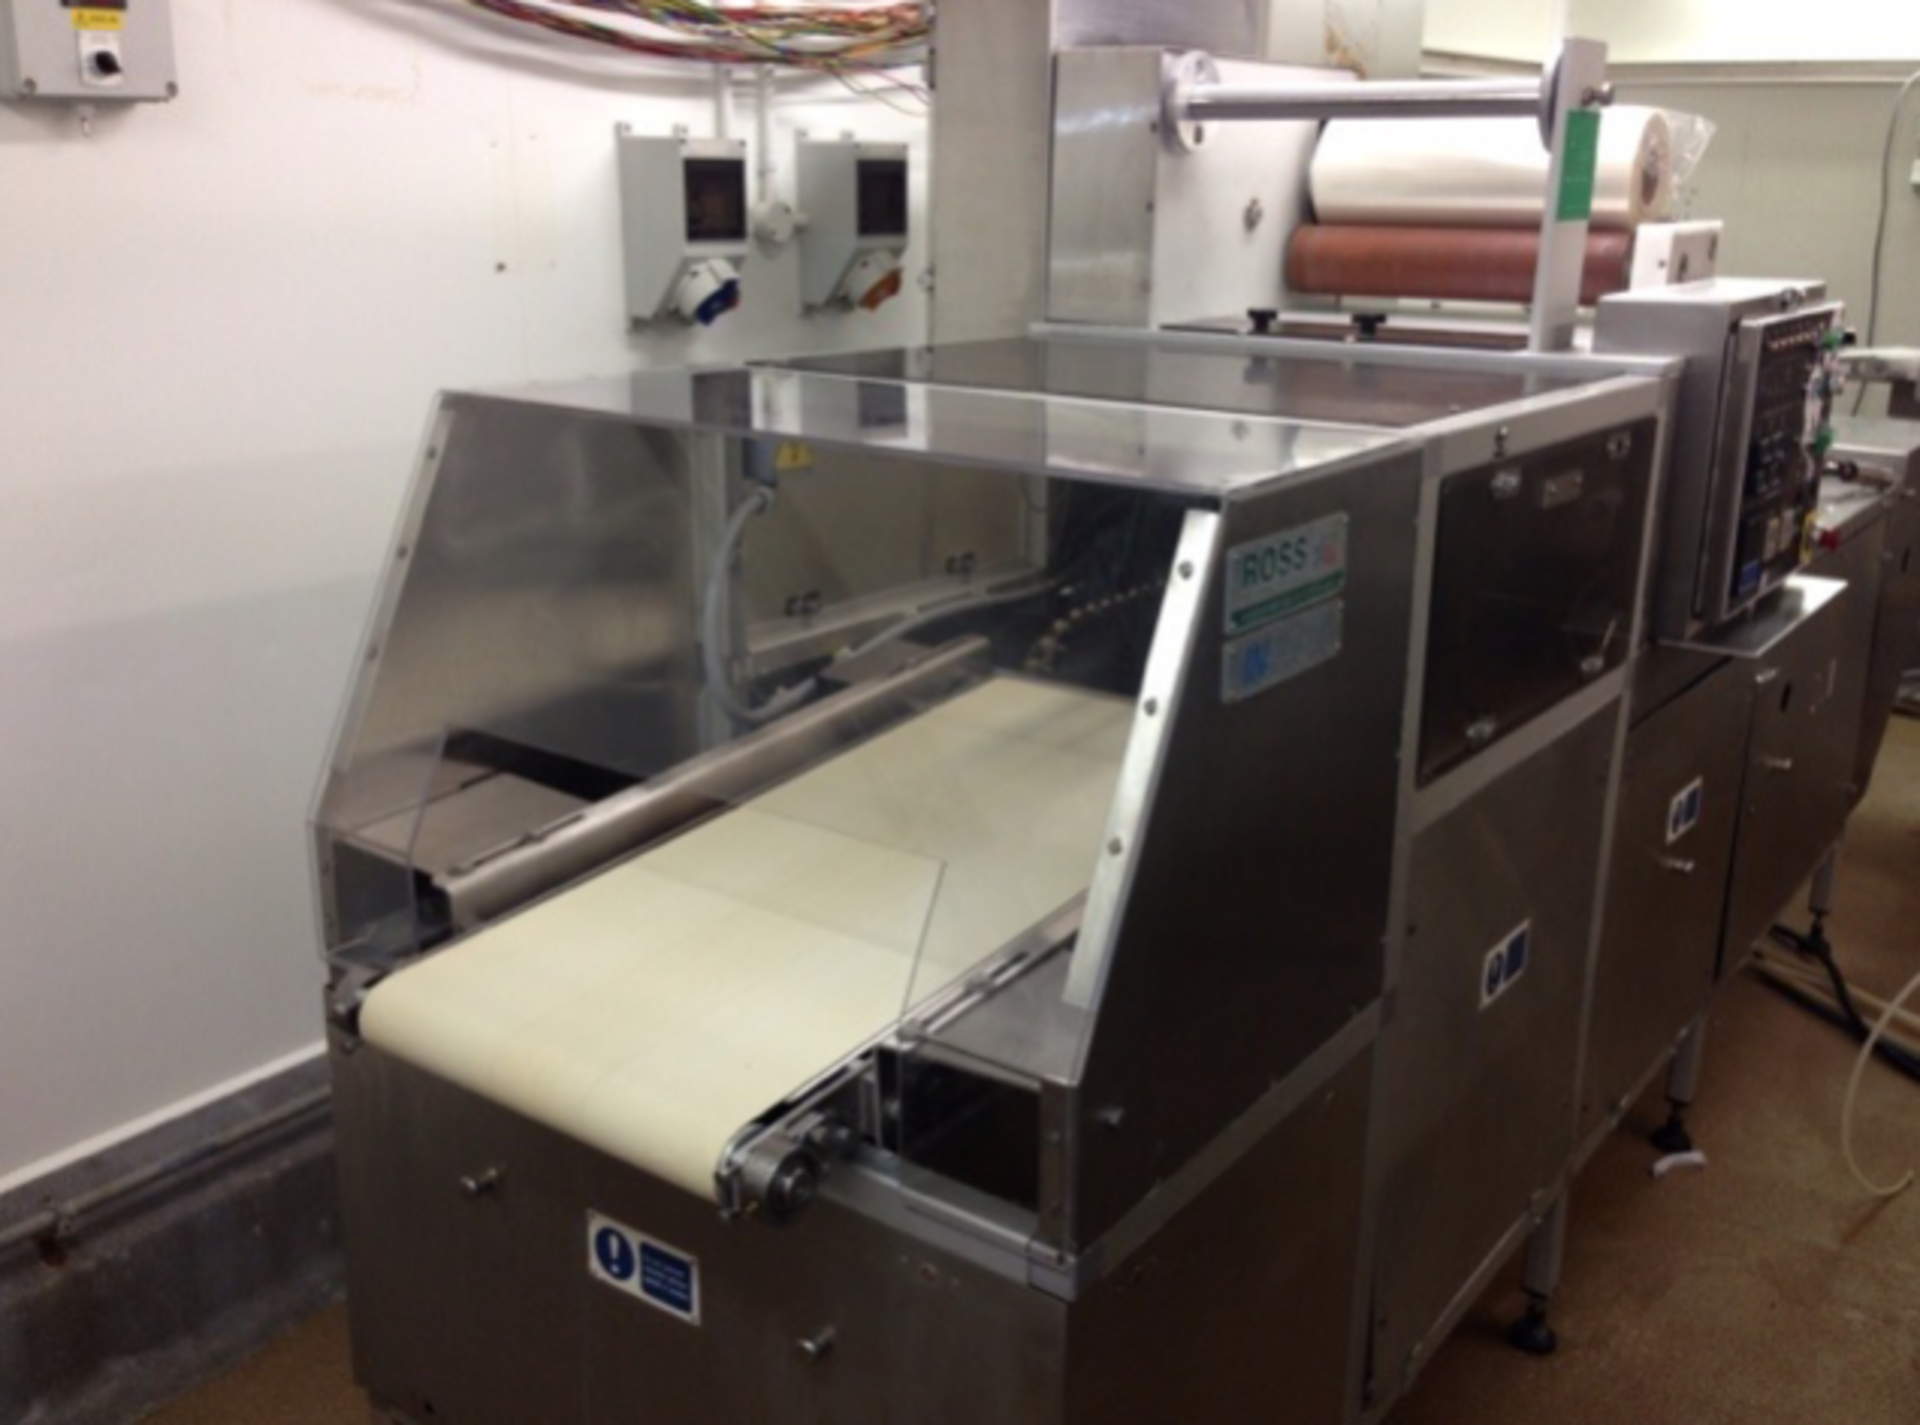 Ross Inpack Junior A20 Automatic Tray Sealer. 10 cycles per minute. Gas & Vacuum. Film width - Image 2 of 8